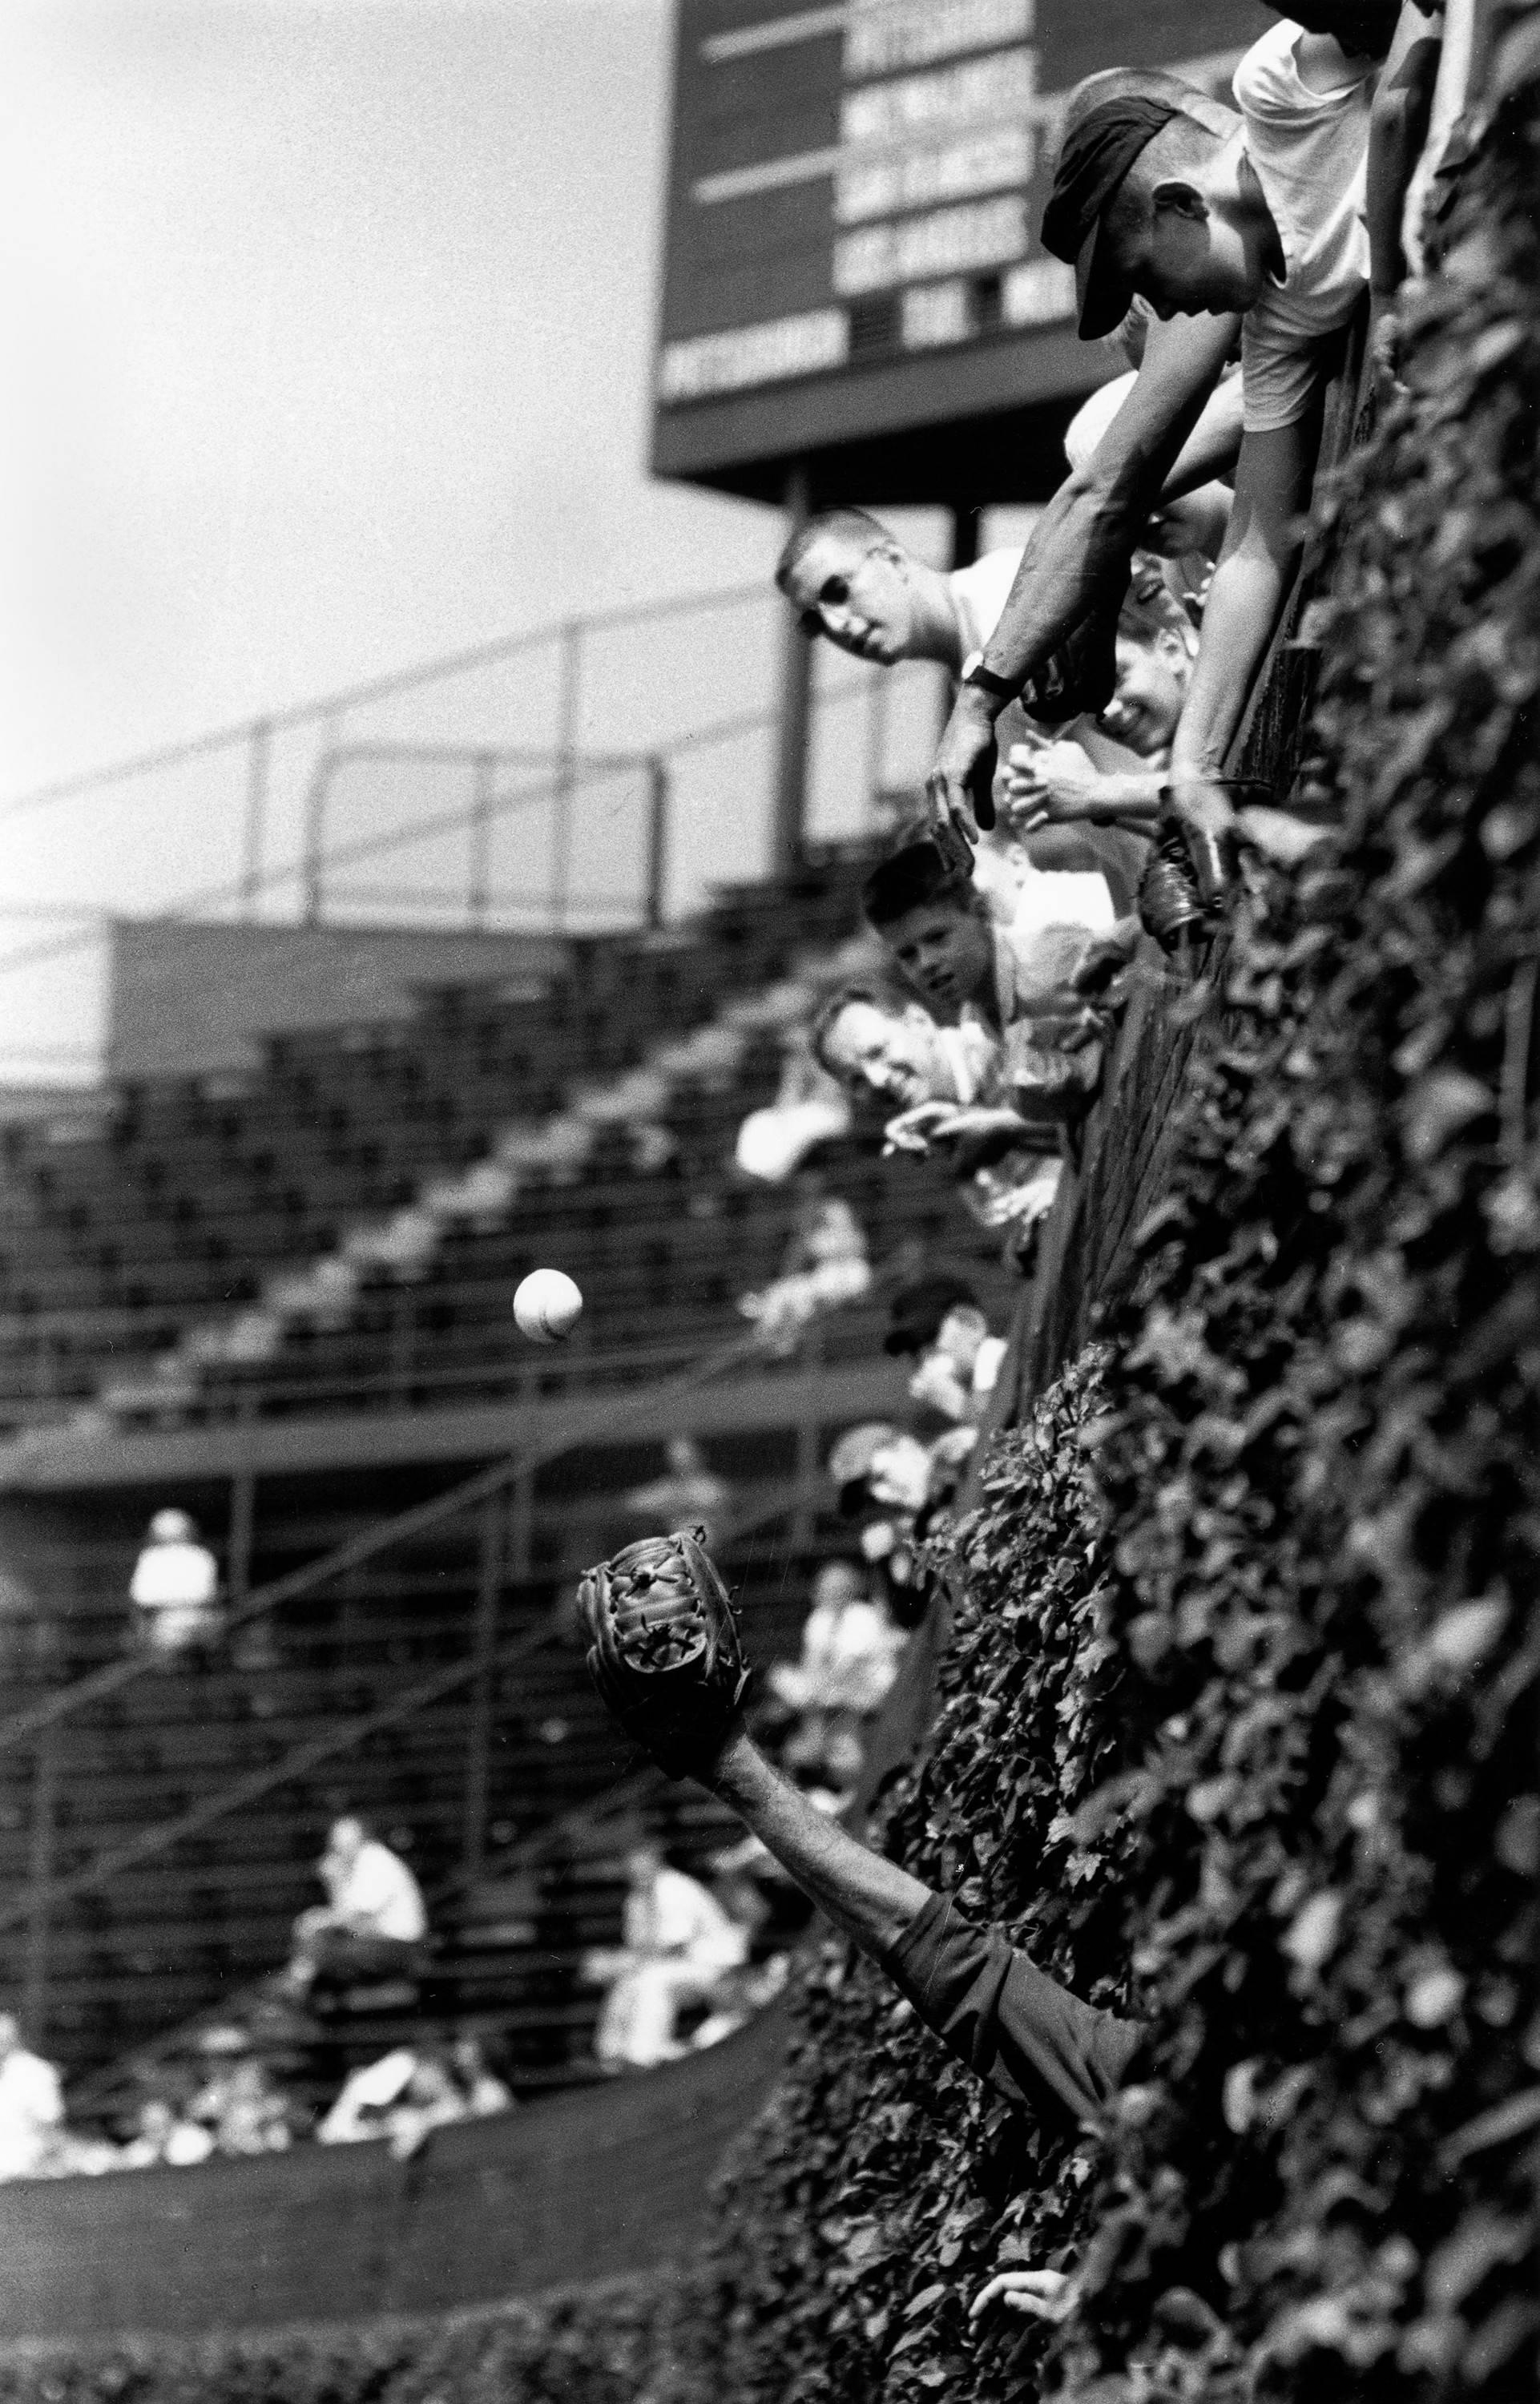 Art Shay Black and White Photograph - Field Practice in the Wrigley Vines, Chicago, 1961